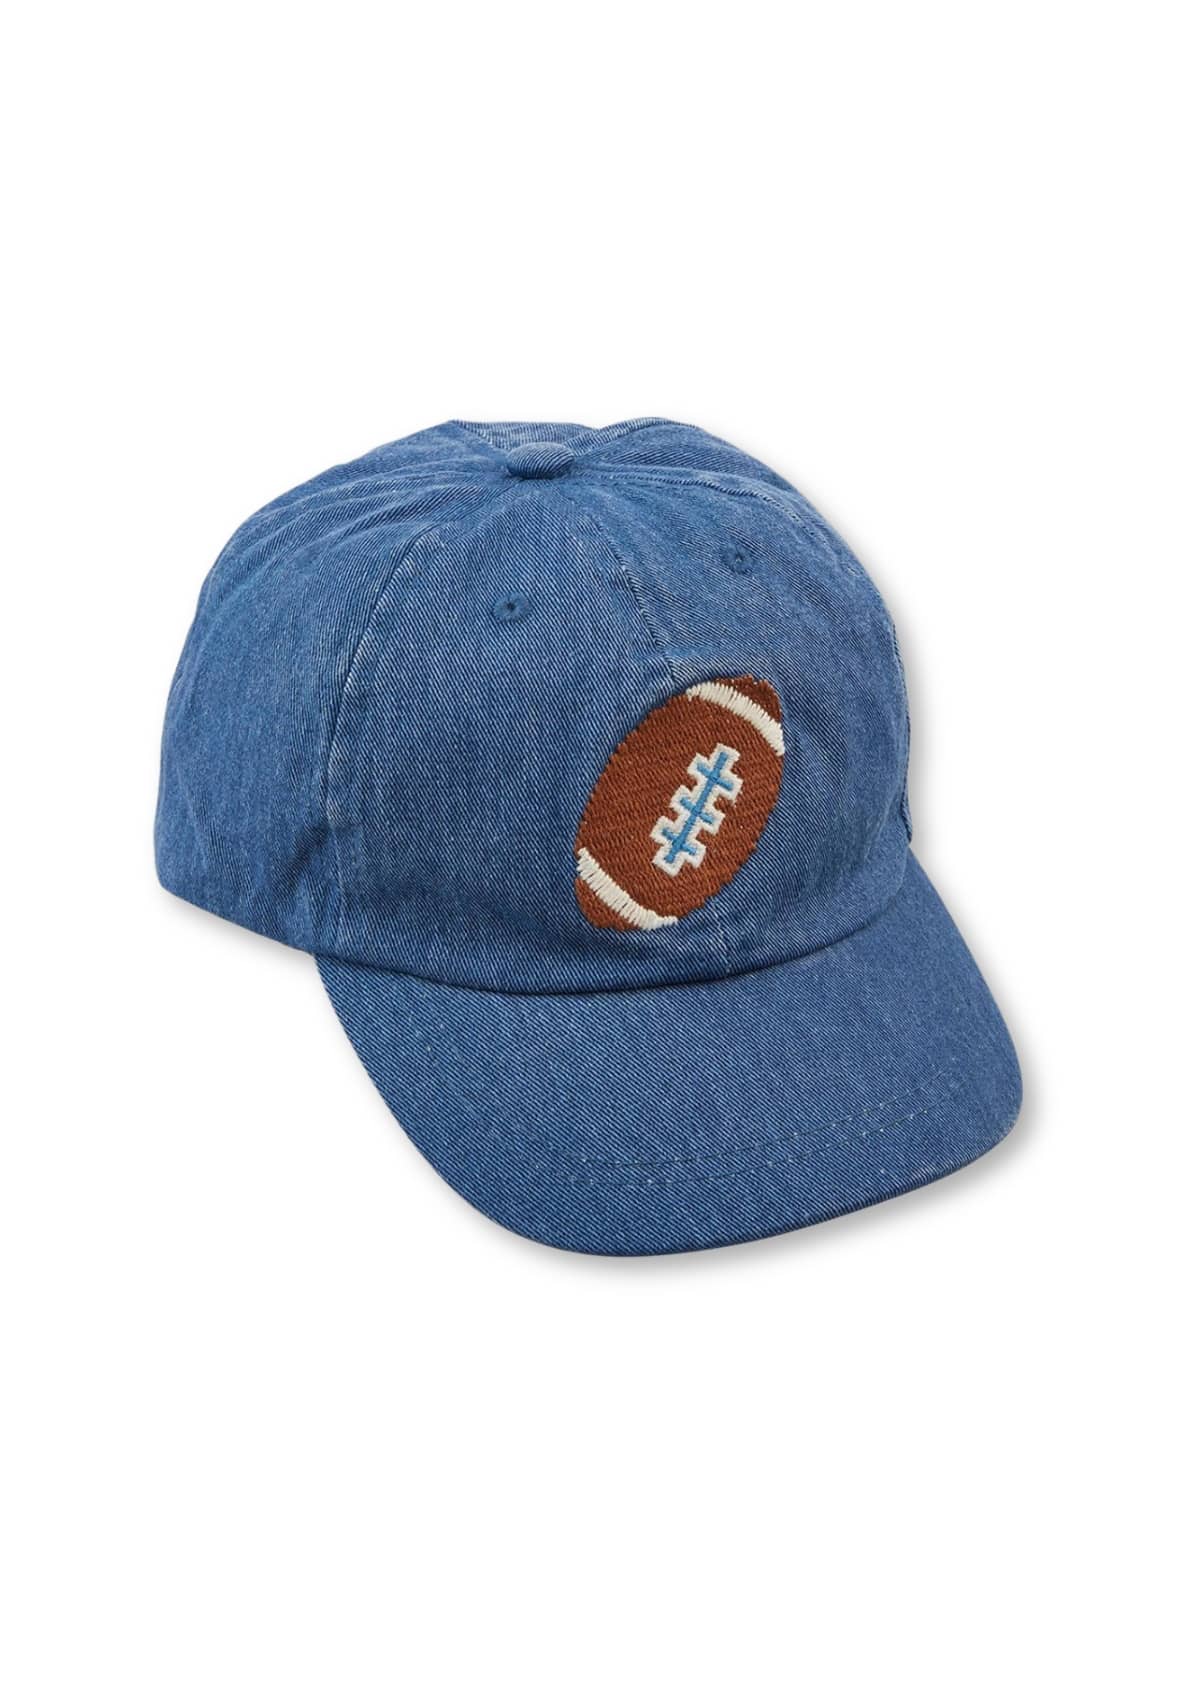 Kids Football Embroidered Hat -Mud Pie / One Coas- Ruby Jane-